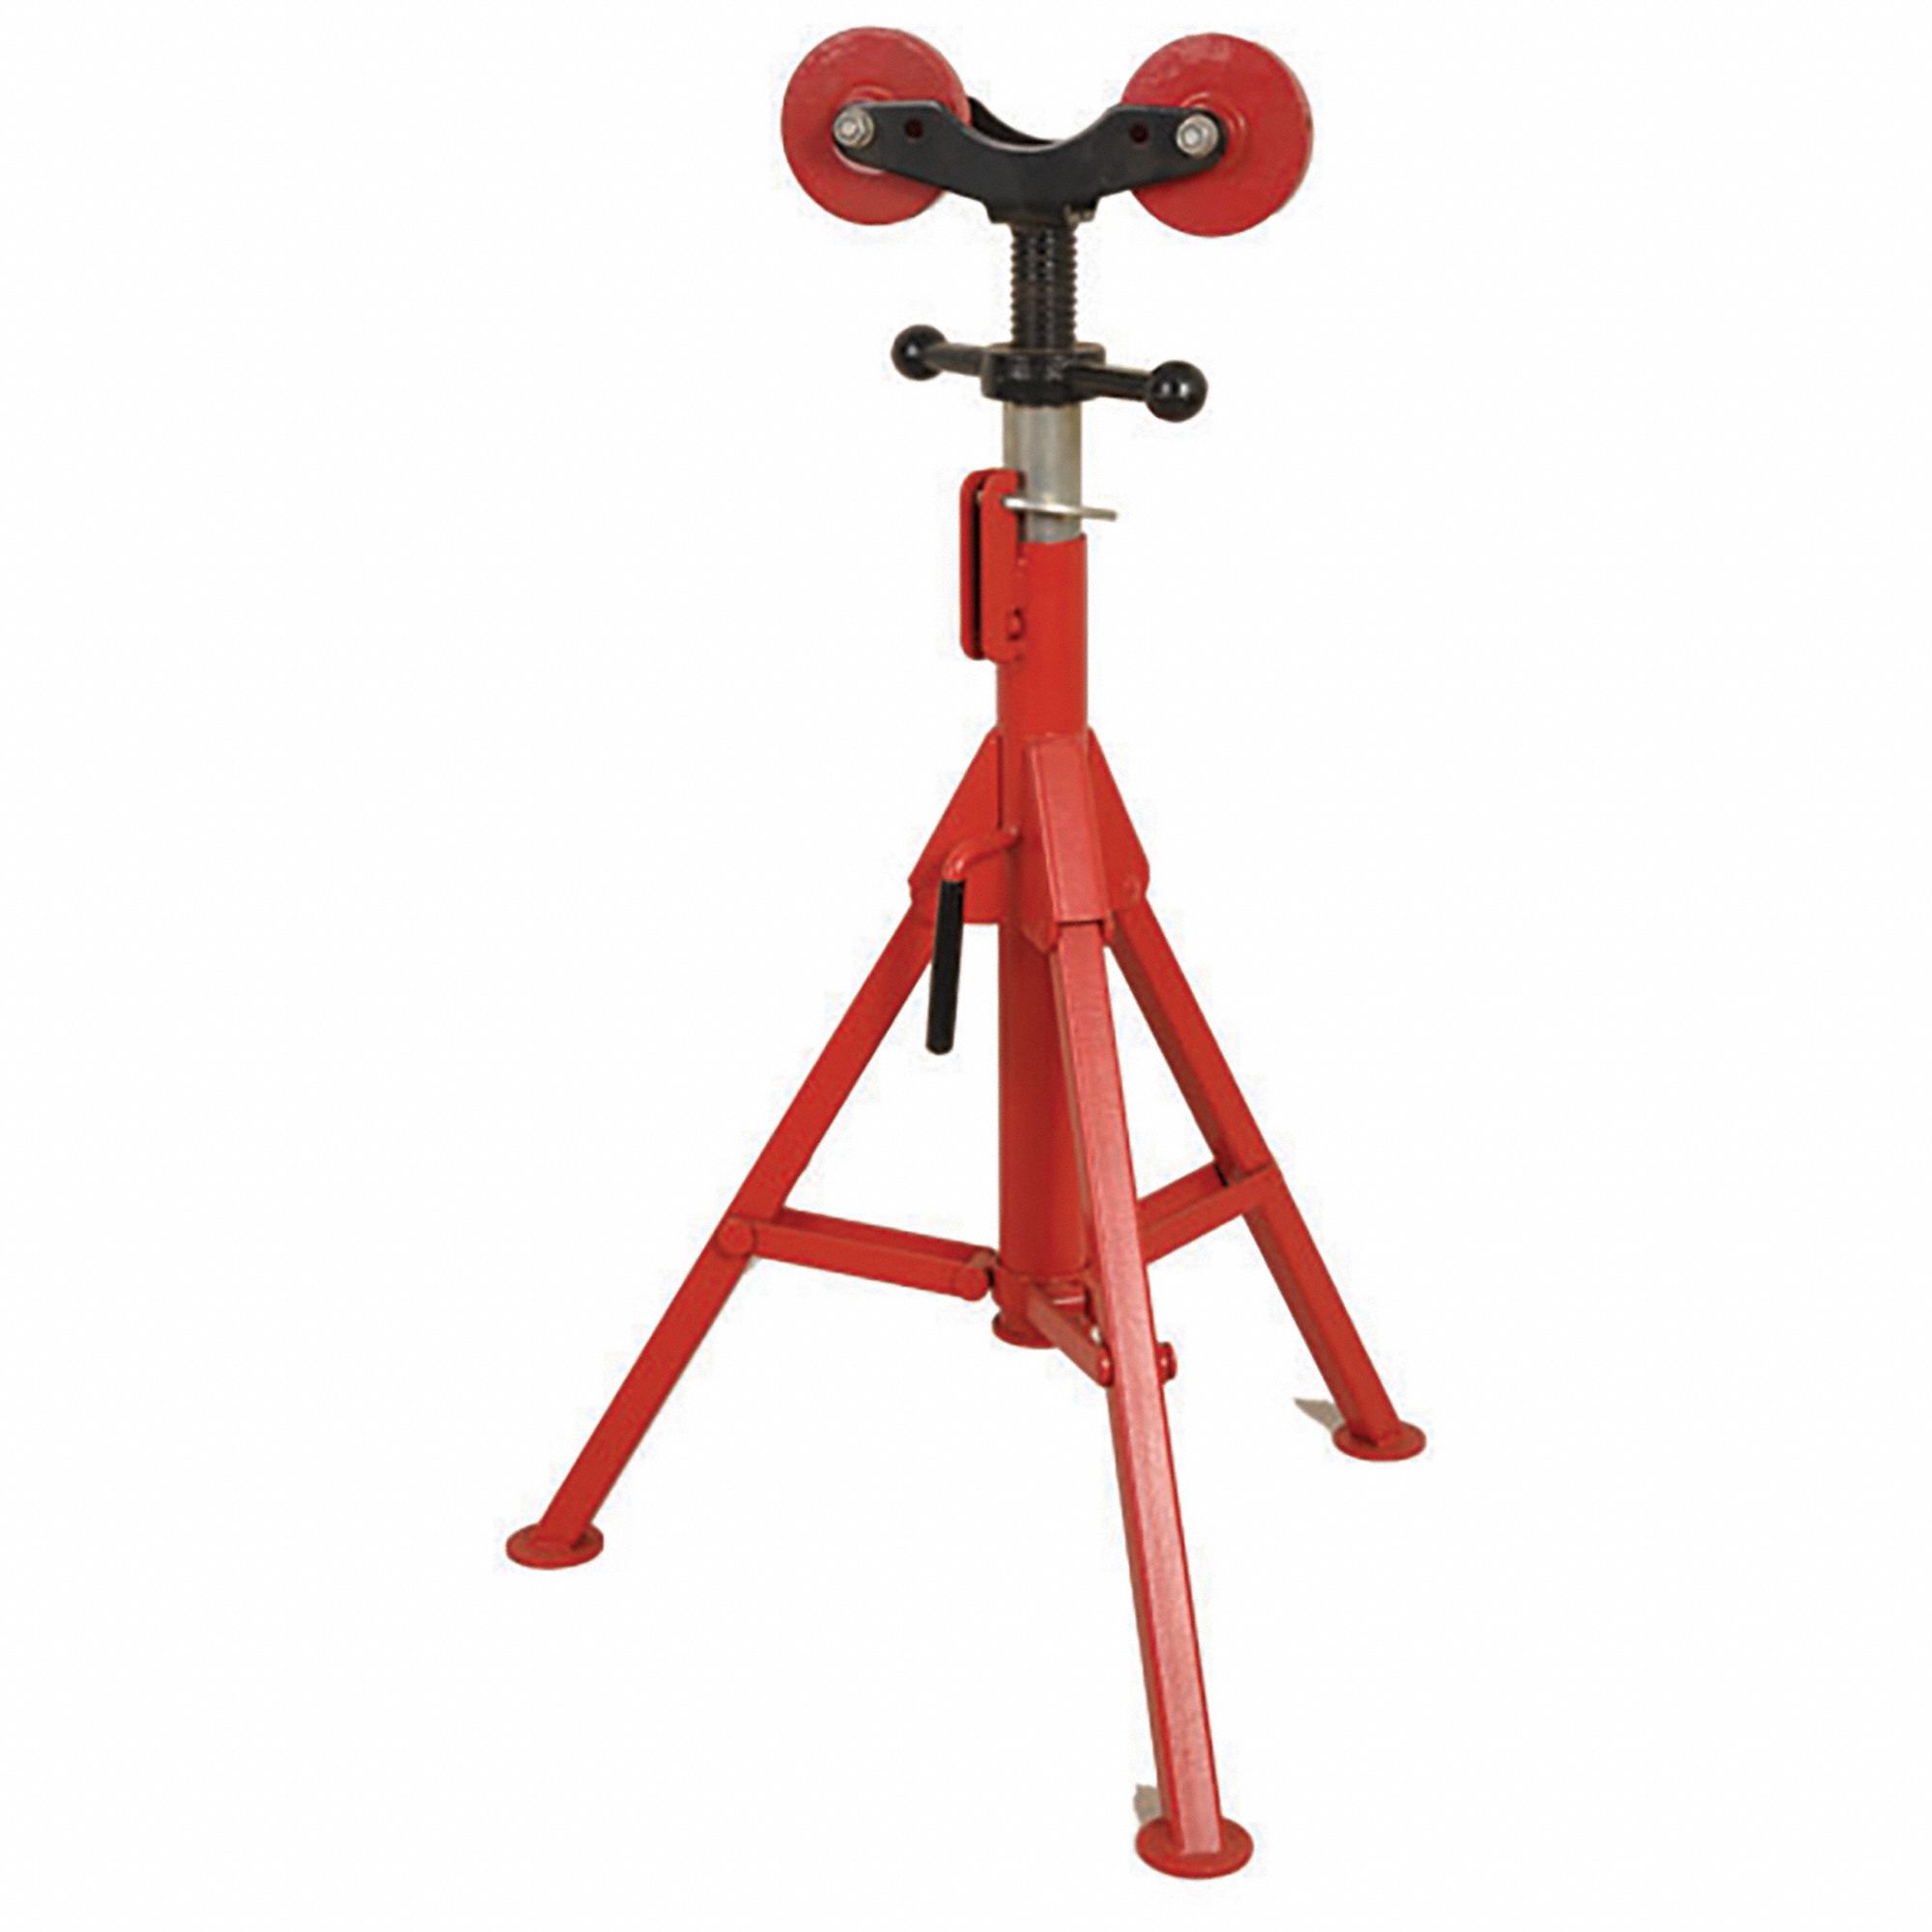 Rothenberger 10646 Super Jack Pipe Stand with Roller Head 16-inch